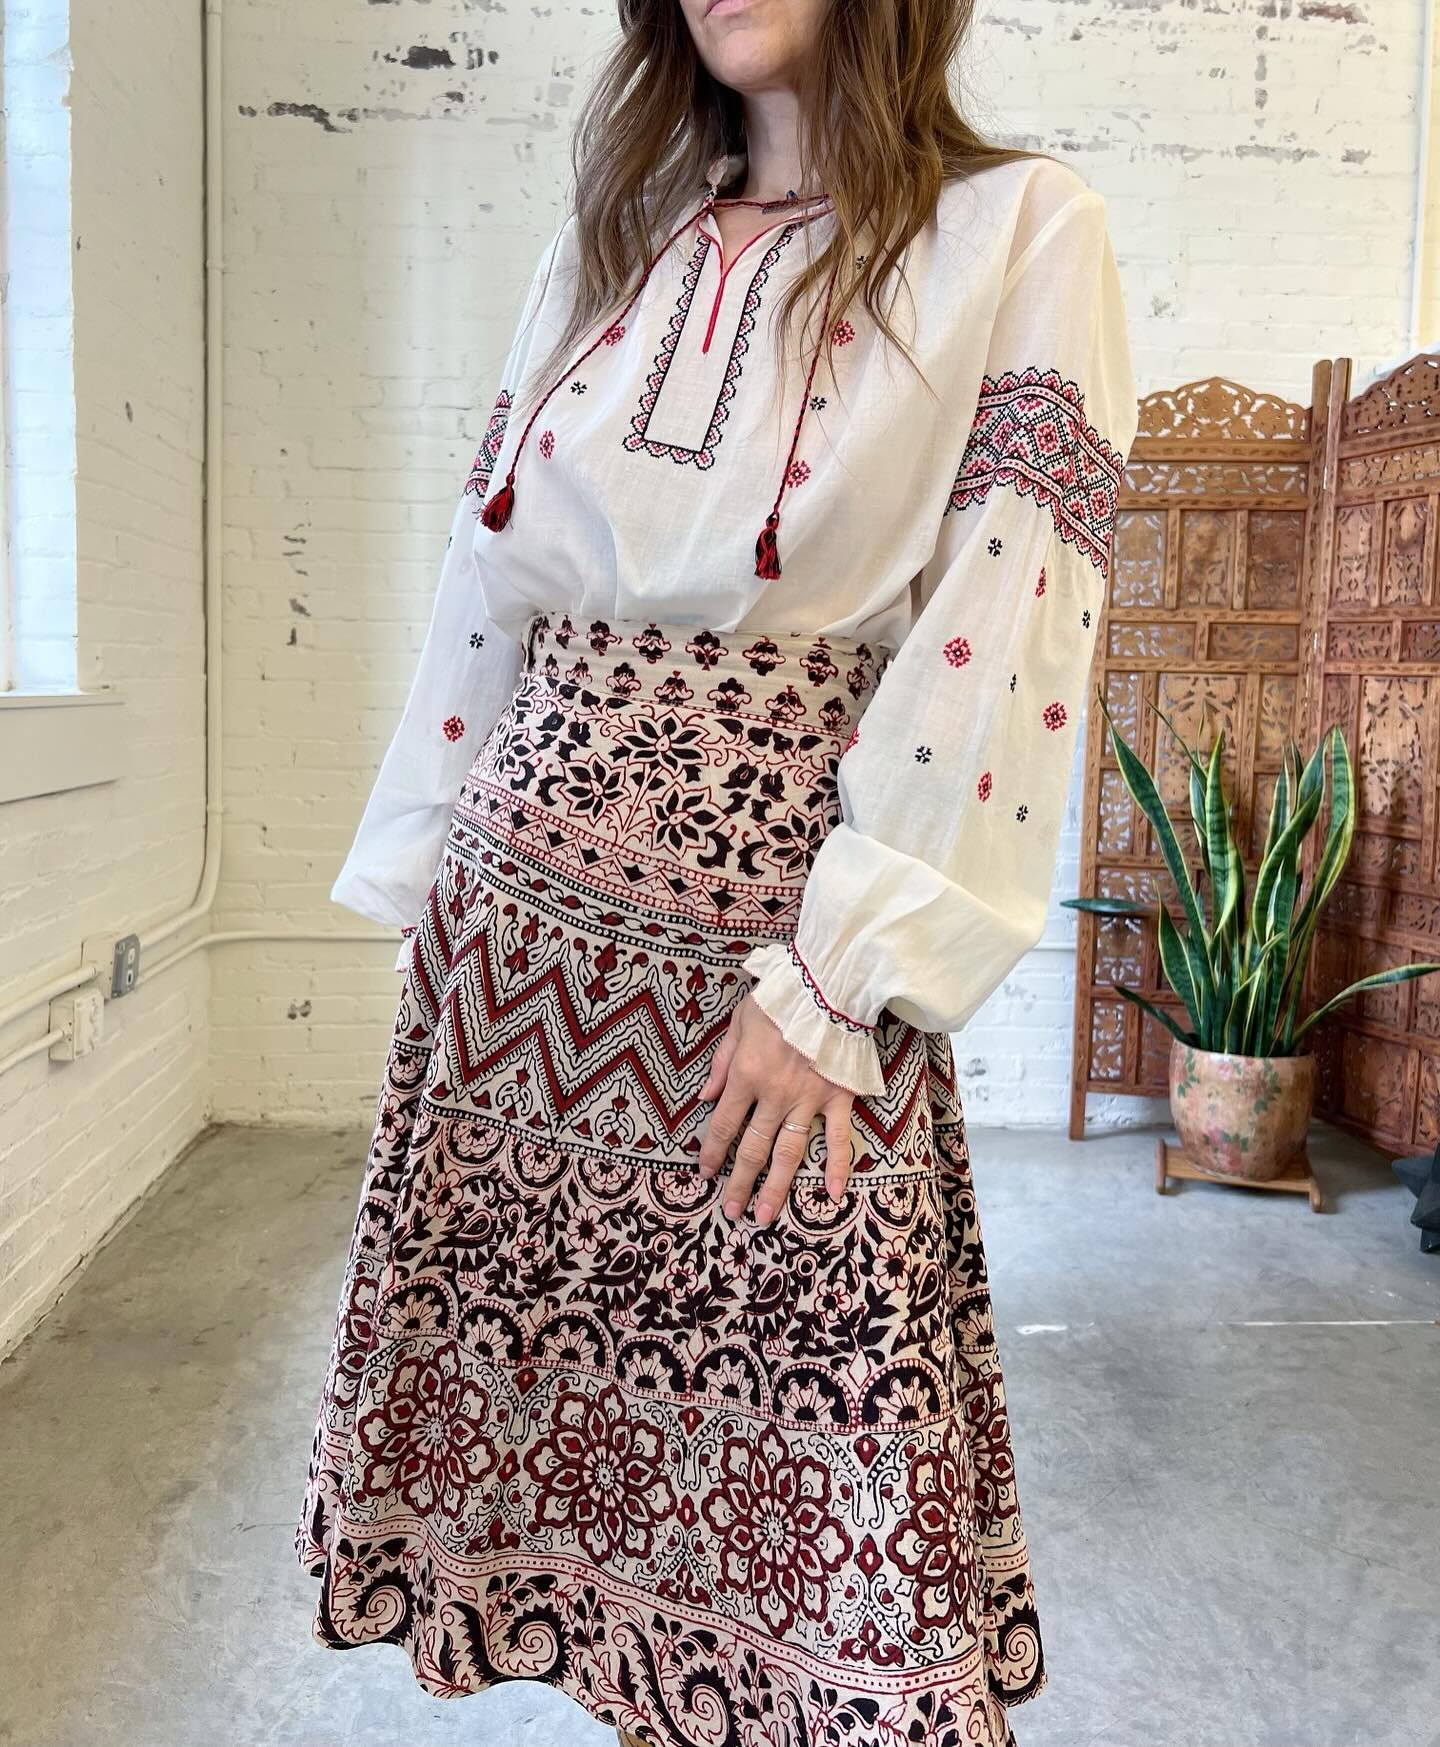 This week&rsquo;s web drop includes some really beautiful boho inspired vintage, featuring gauzy Indian block prints and embroidery. Shop the drop today at noon cst!

#begreenbuyvintage #vintageforall #boho #bohostyle #bohoinspo #bohovintage #vintage